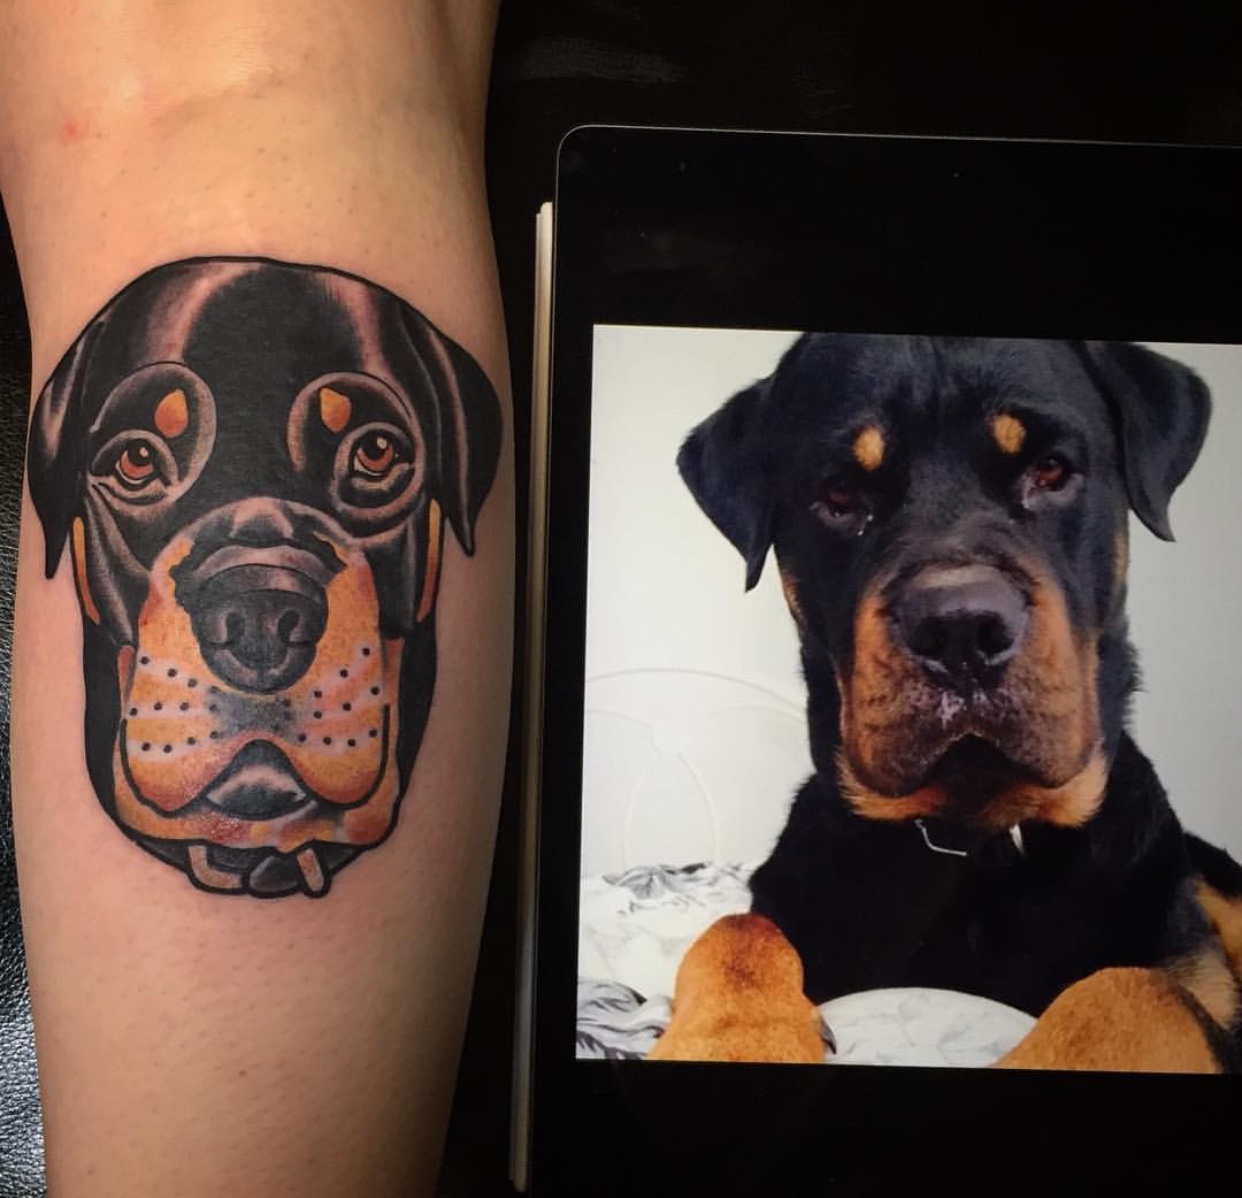 a photo of a Rottweiler in an ipad beside a tattoo of its face on the leg